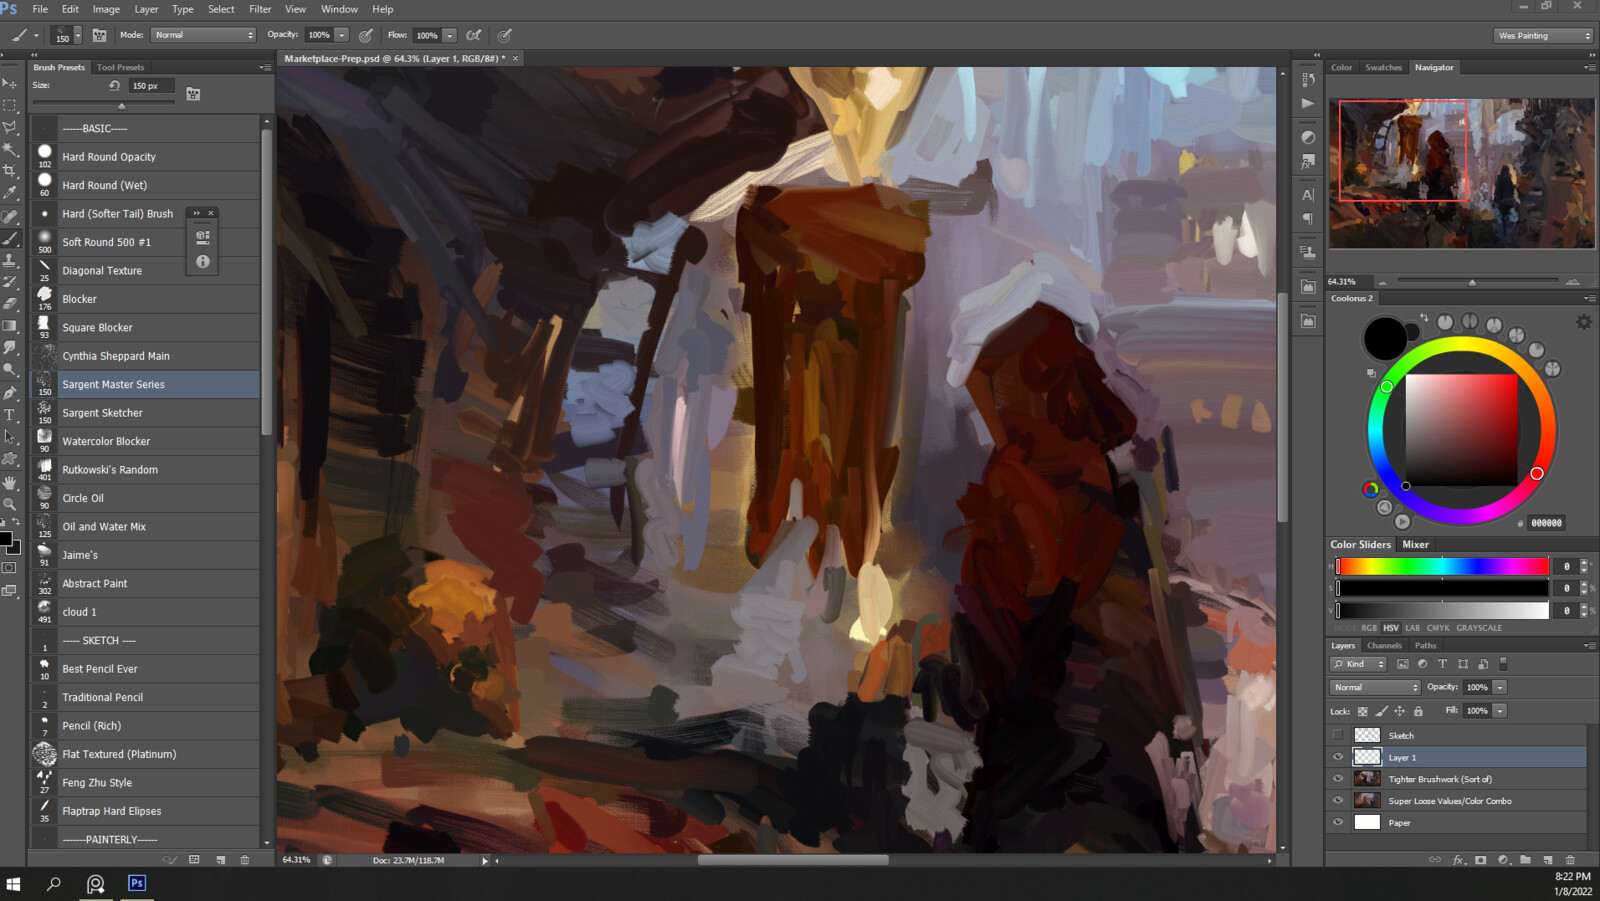 A little making-of WIP screengrab, sketching with oil brushes instead of pencils